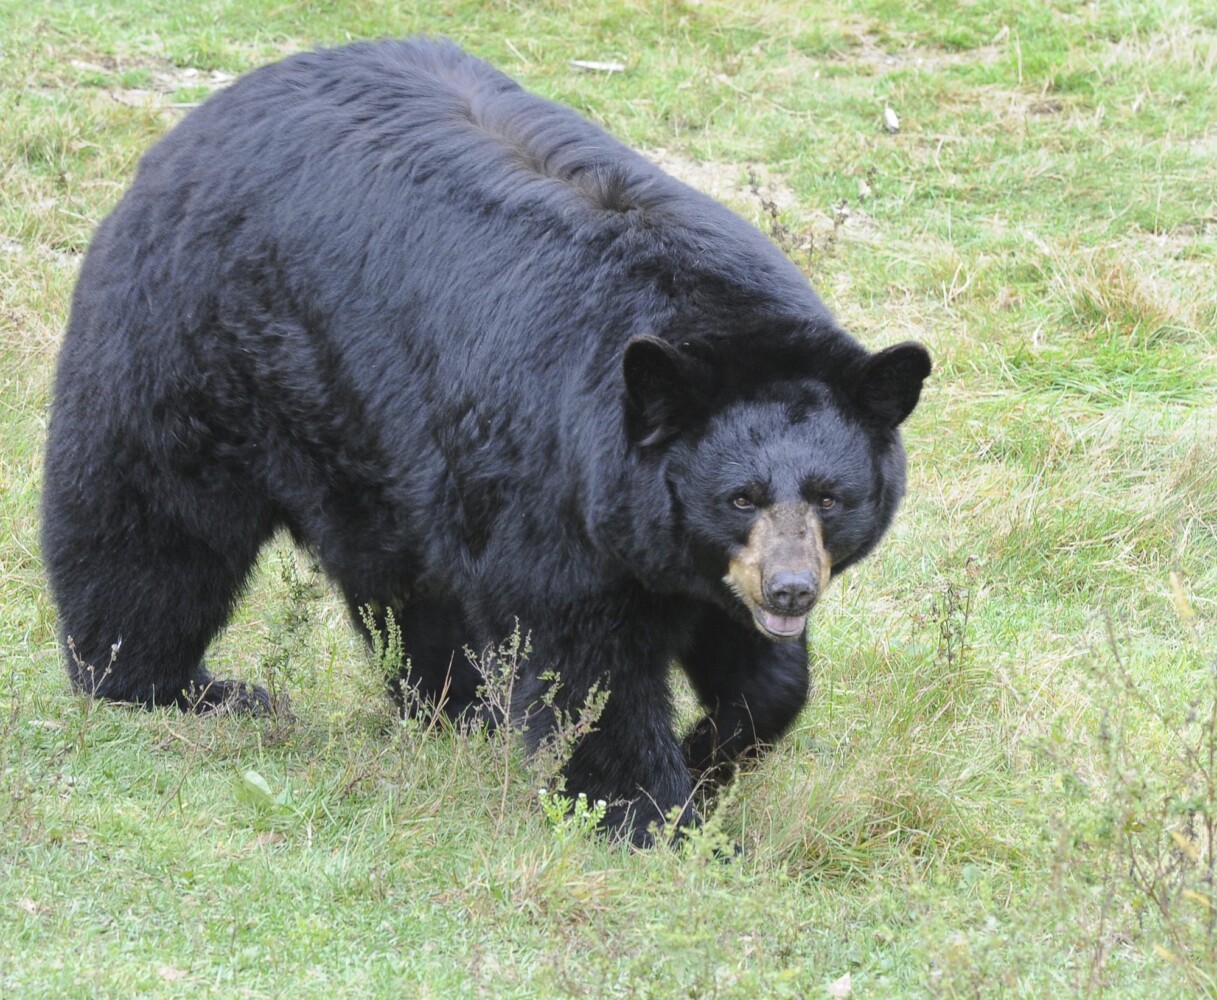 Bear hunting petition reignites 20-year-old debate over baiting